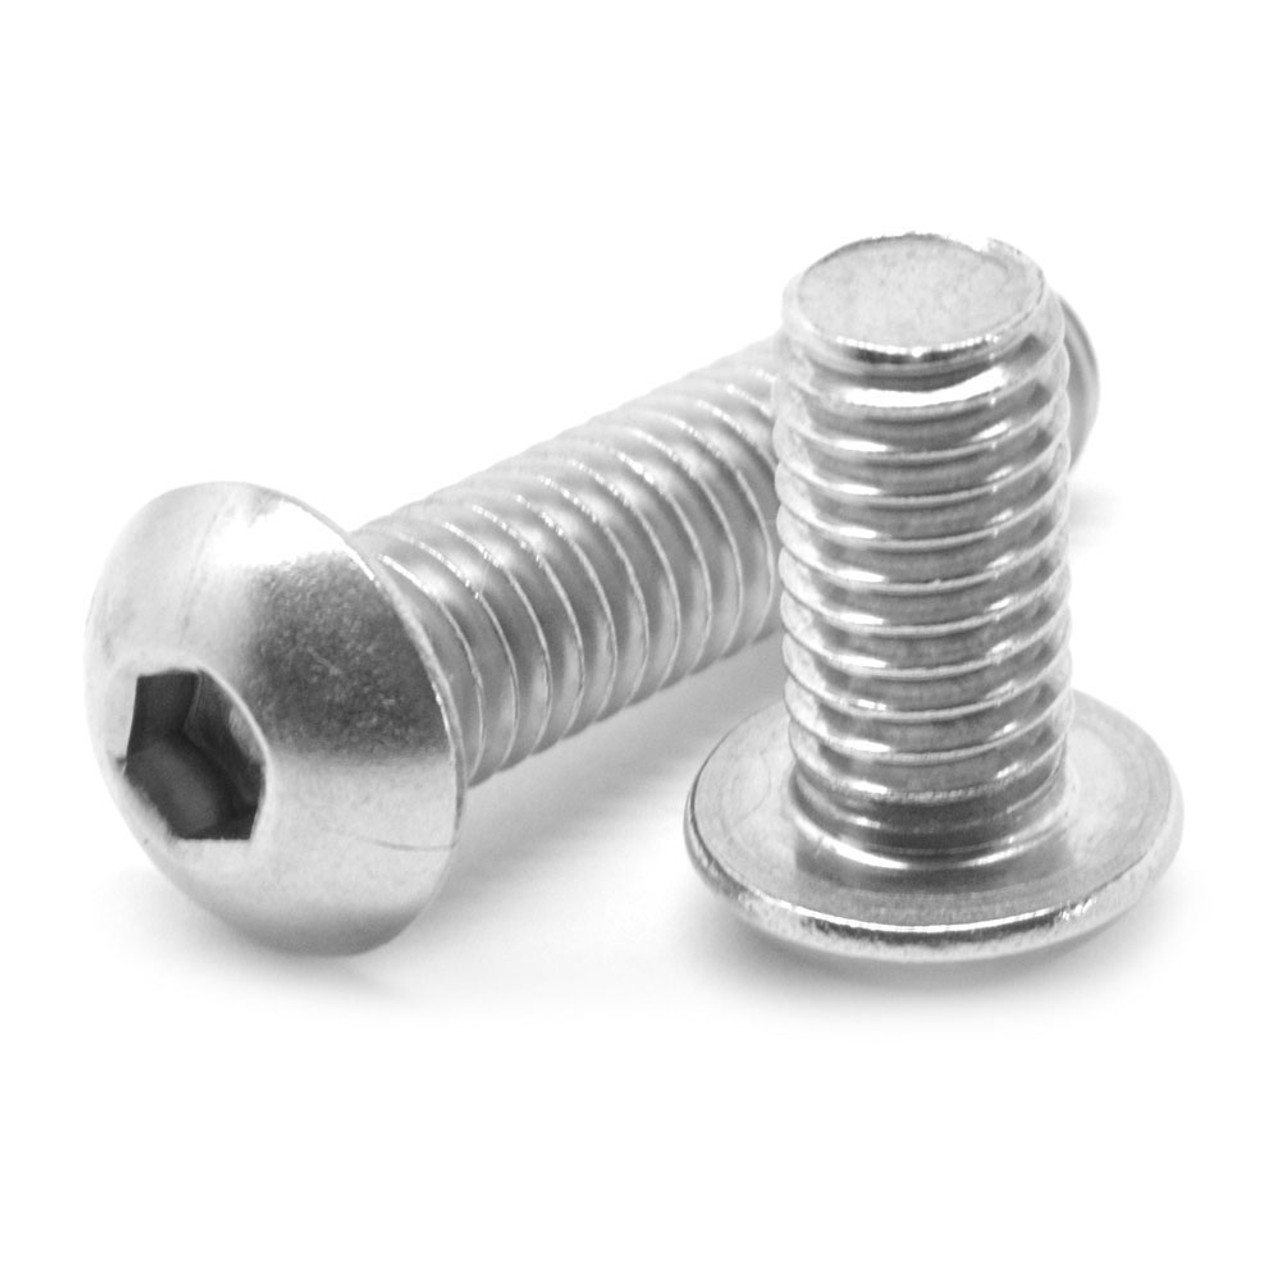 M6 x 1.00 x 60 MM (FT) Coarse Thread ISO 7380 Socket Button Head Cap Screw Stainless Steel 18-8